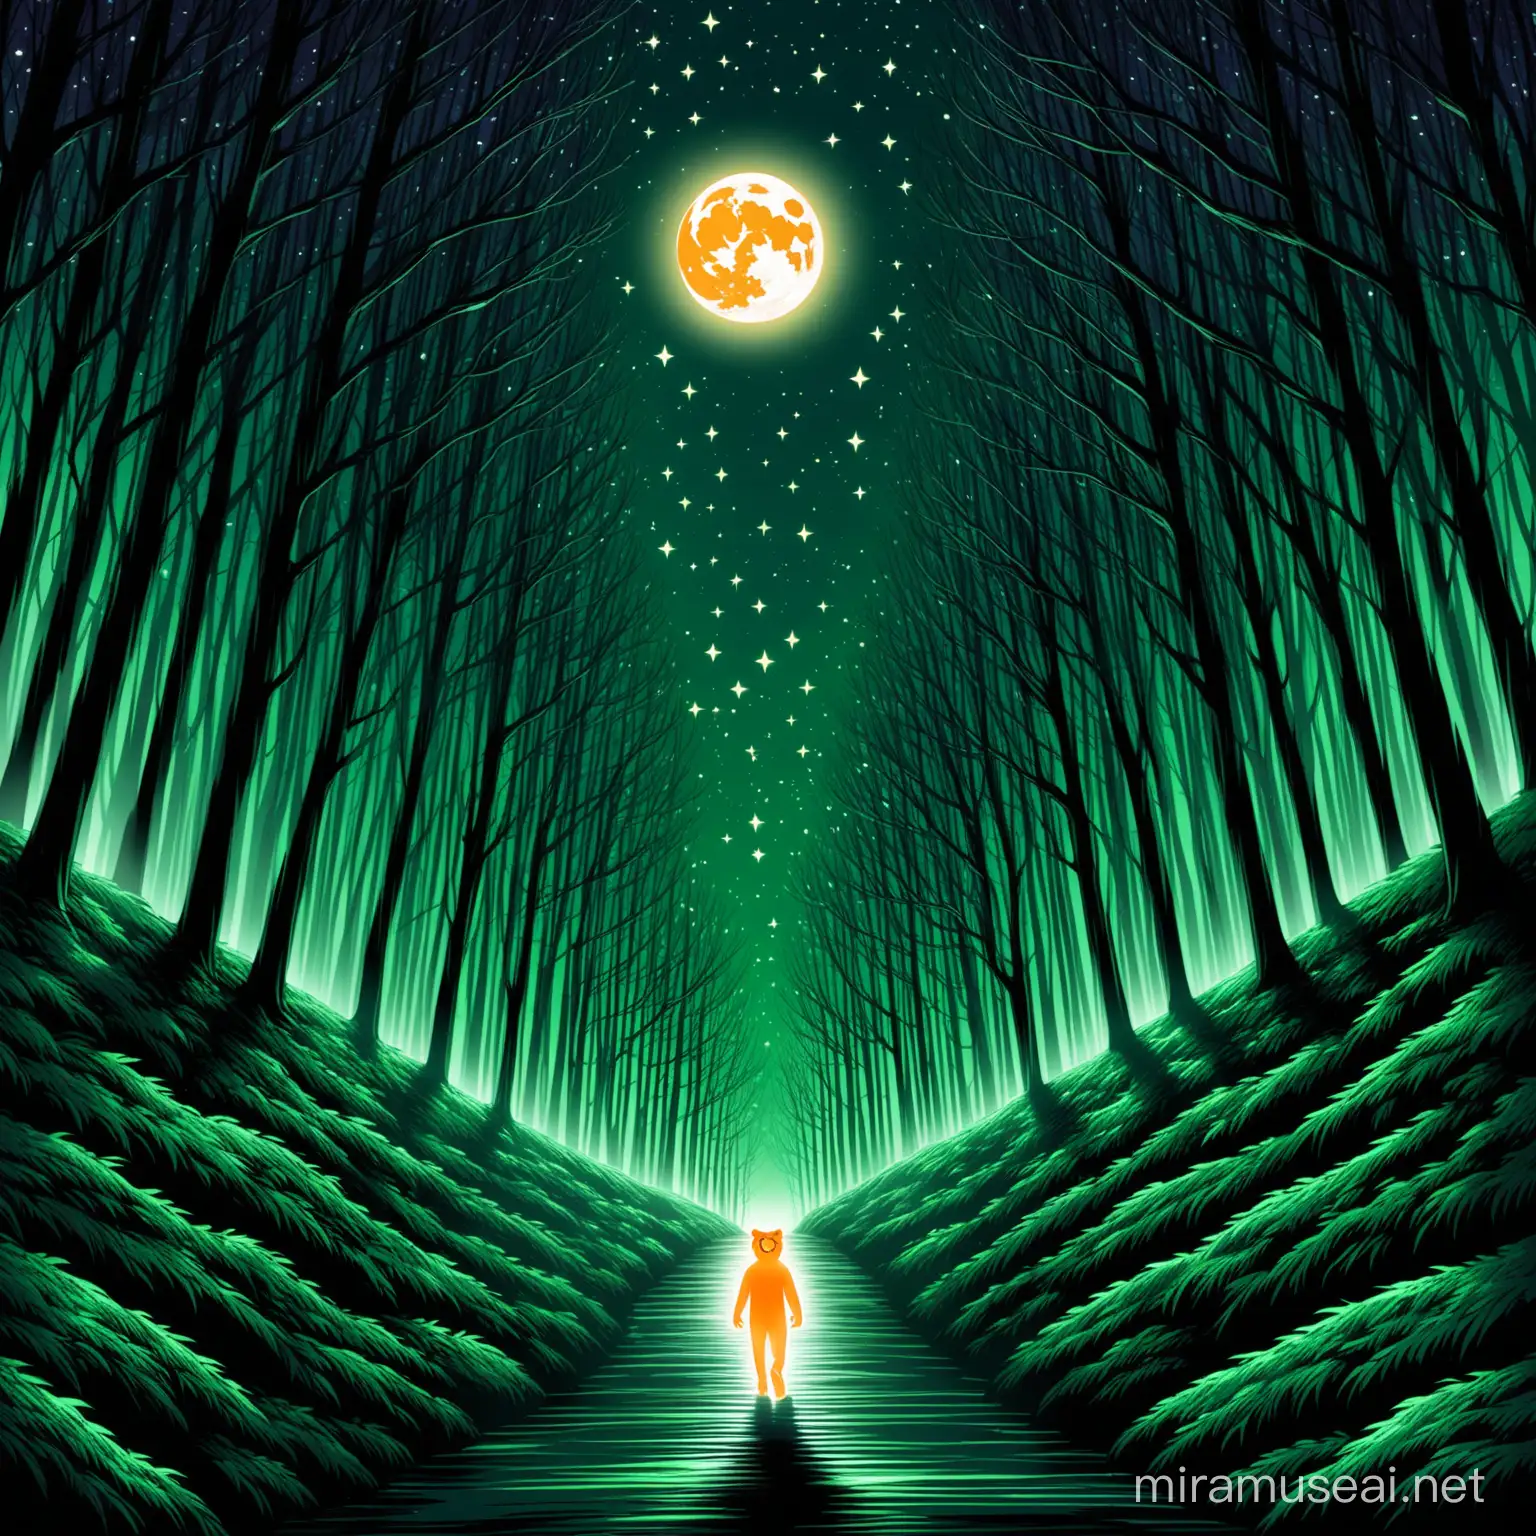 Ghost-Tiger
appreance- orange transparent  skin white white symmetical stripes/full body/ walking down hill towards river/determined-confinedent
background- night/ noir forest/ river/stars/ cresent twilight moon green 
